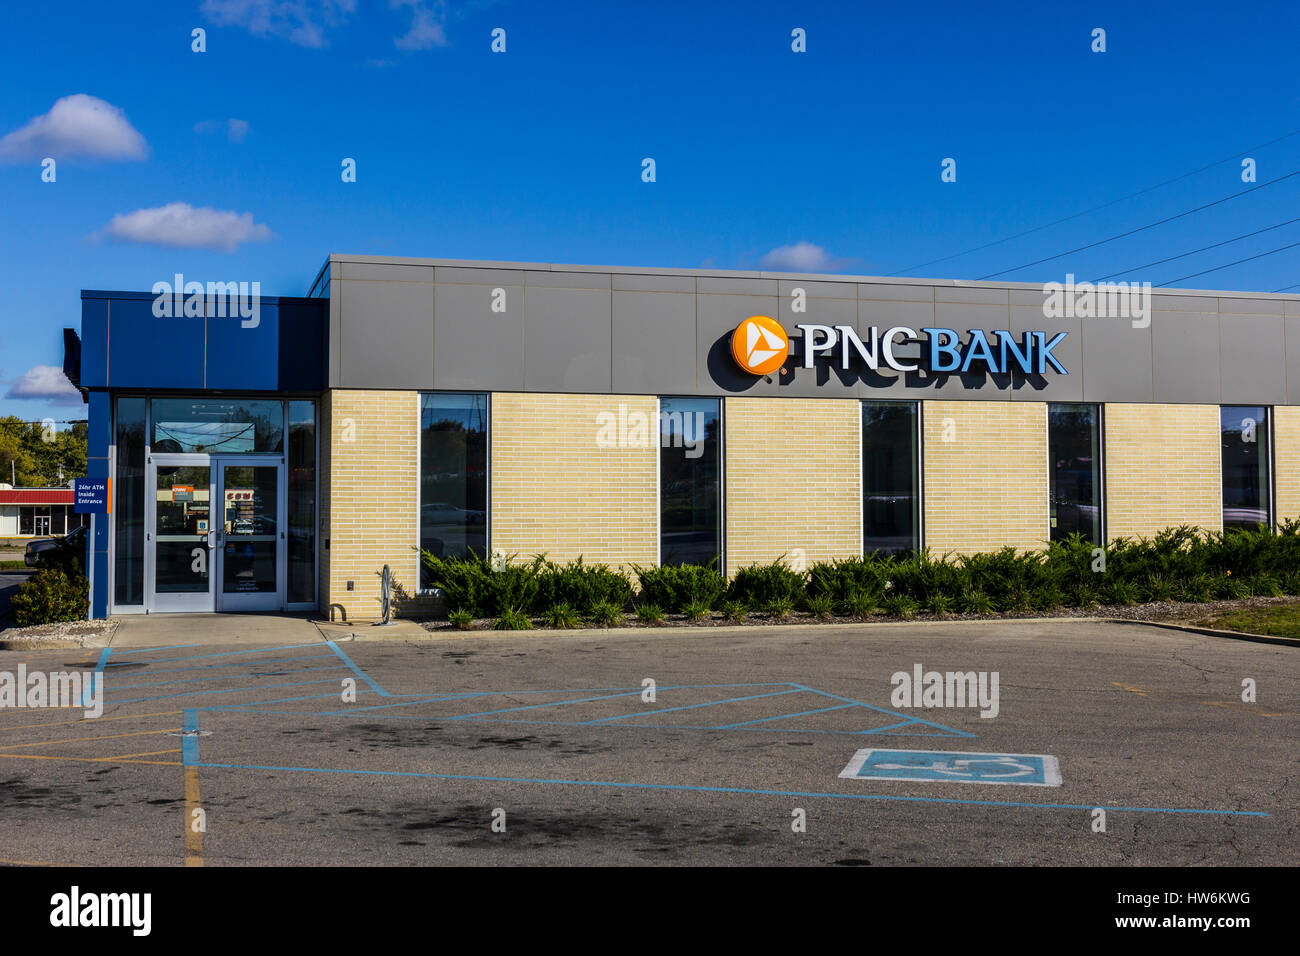 Anderson - Circa October 2016: PNC Bank Branch. PNC Financial Services offers Retail, Corporate and Mortgage Banking VII Stock Photo